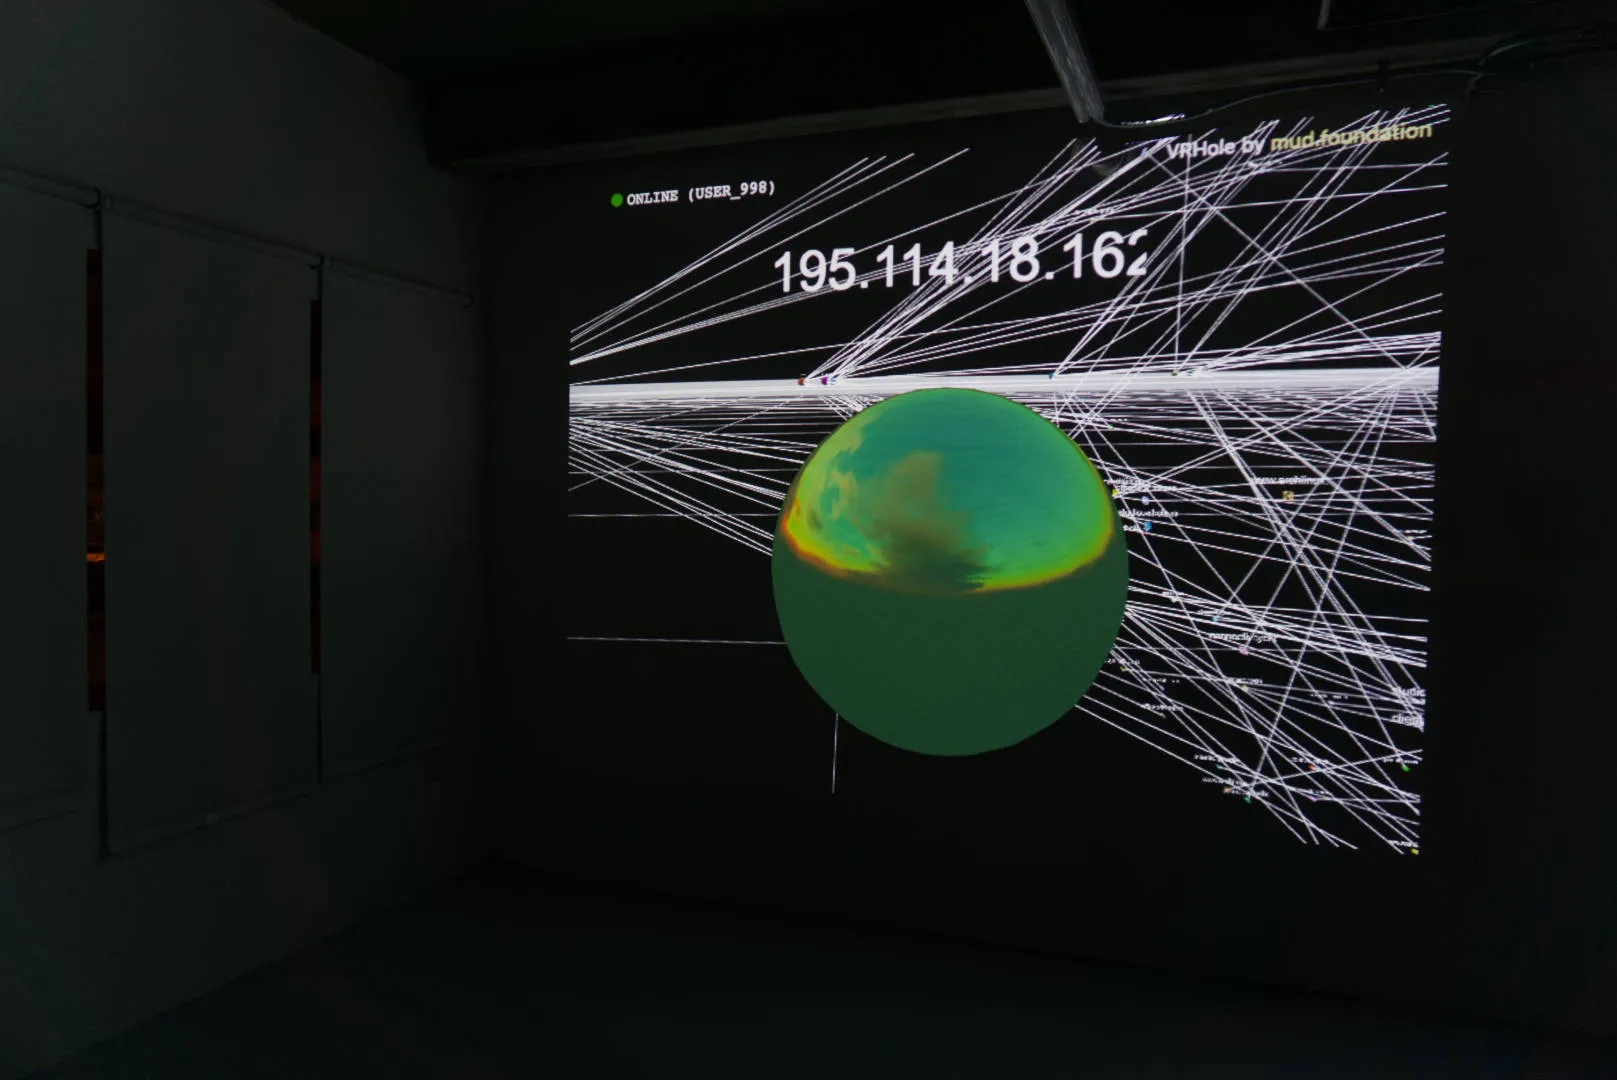 A screen in a dark room showing a green ball, numbers and white lines that intertwines